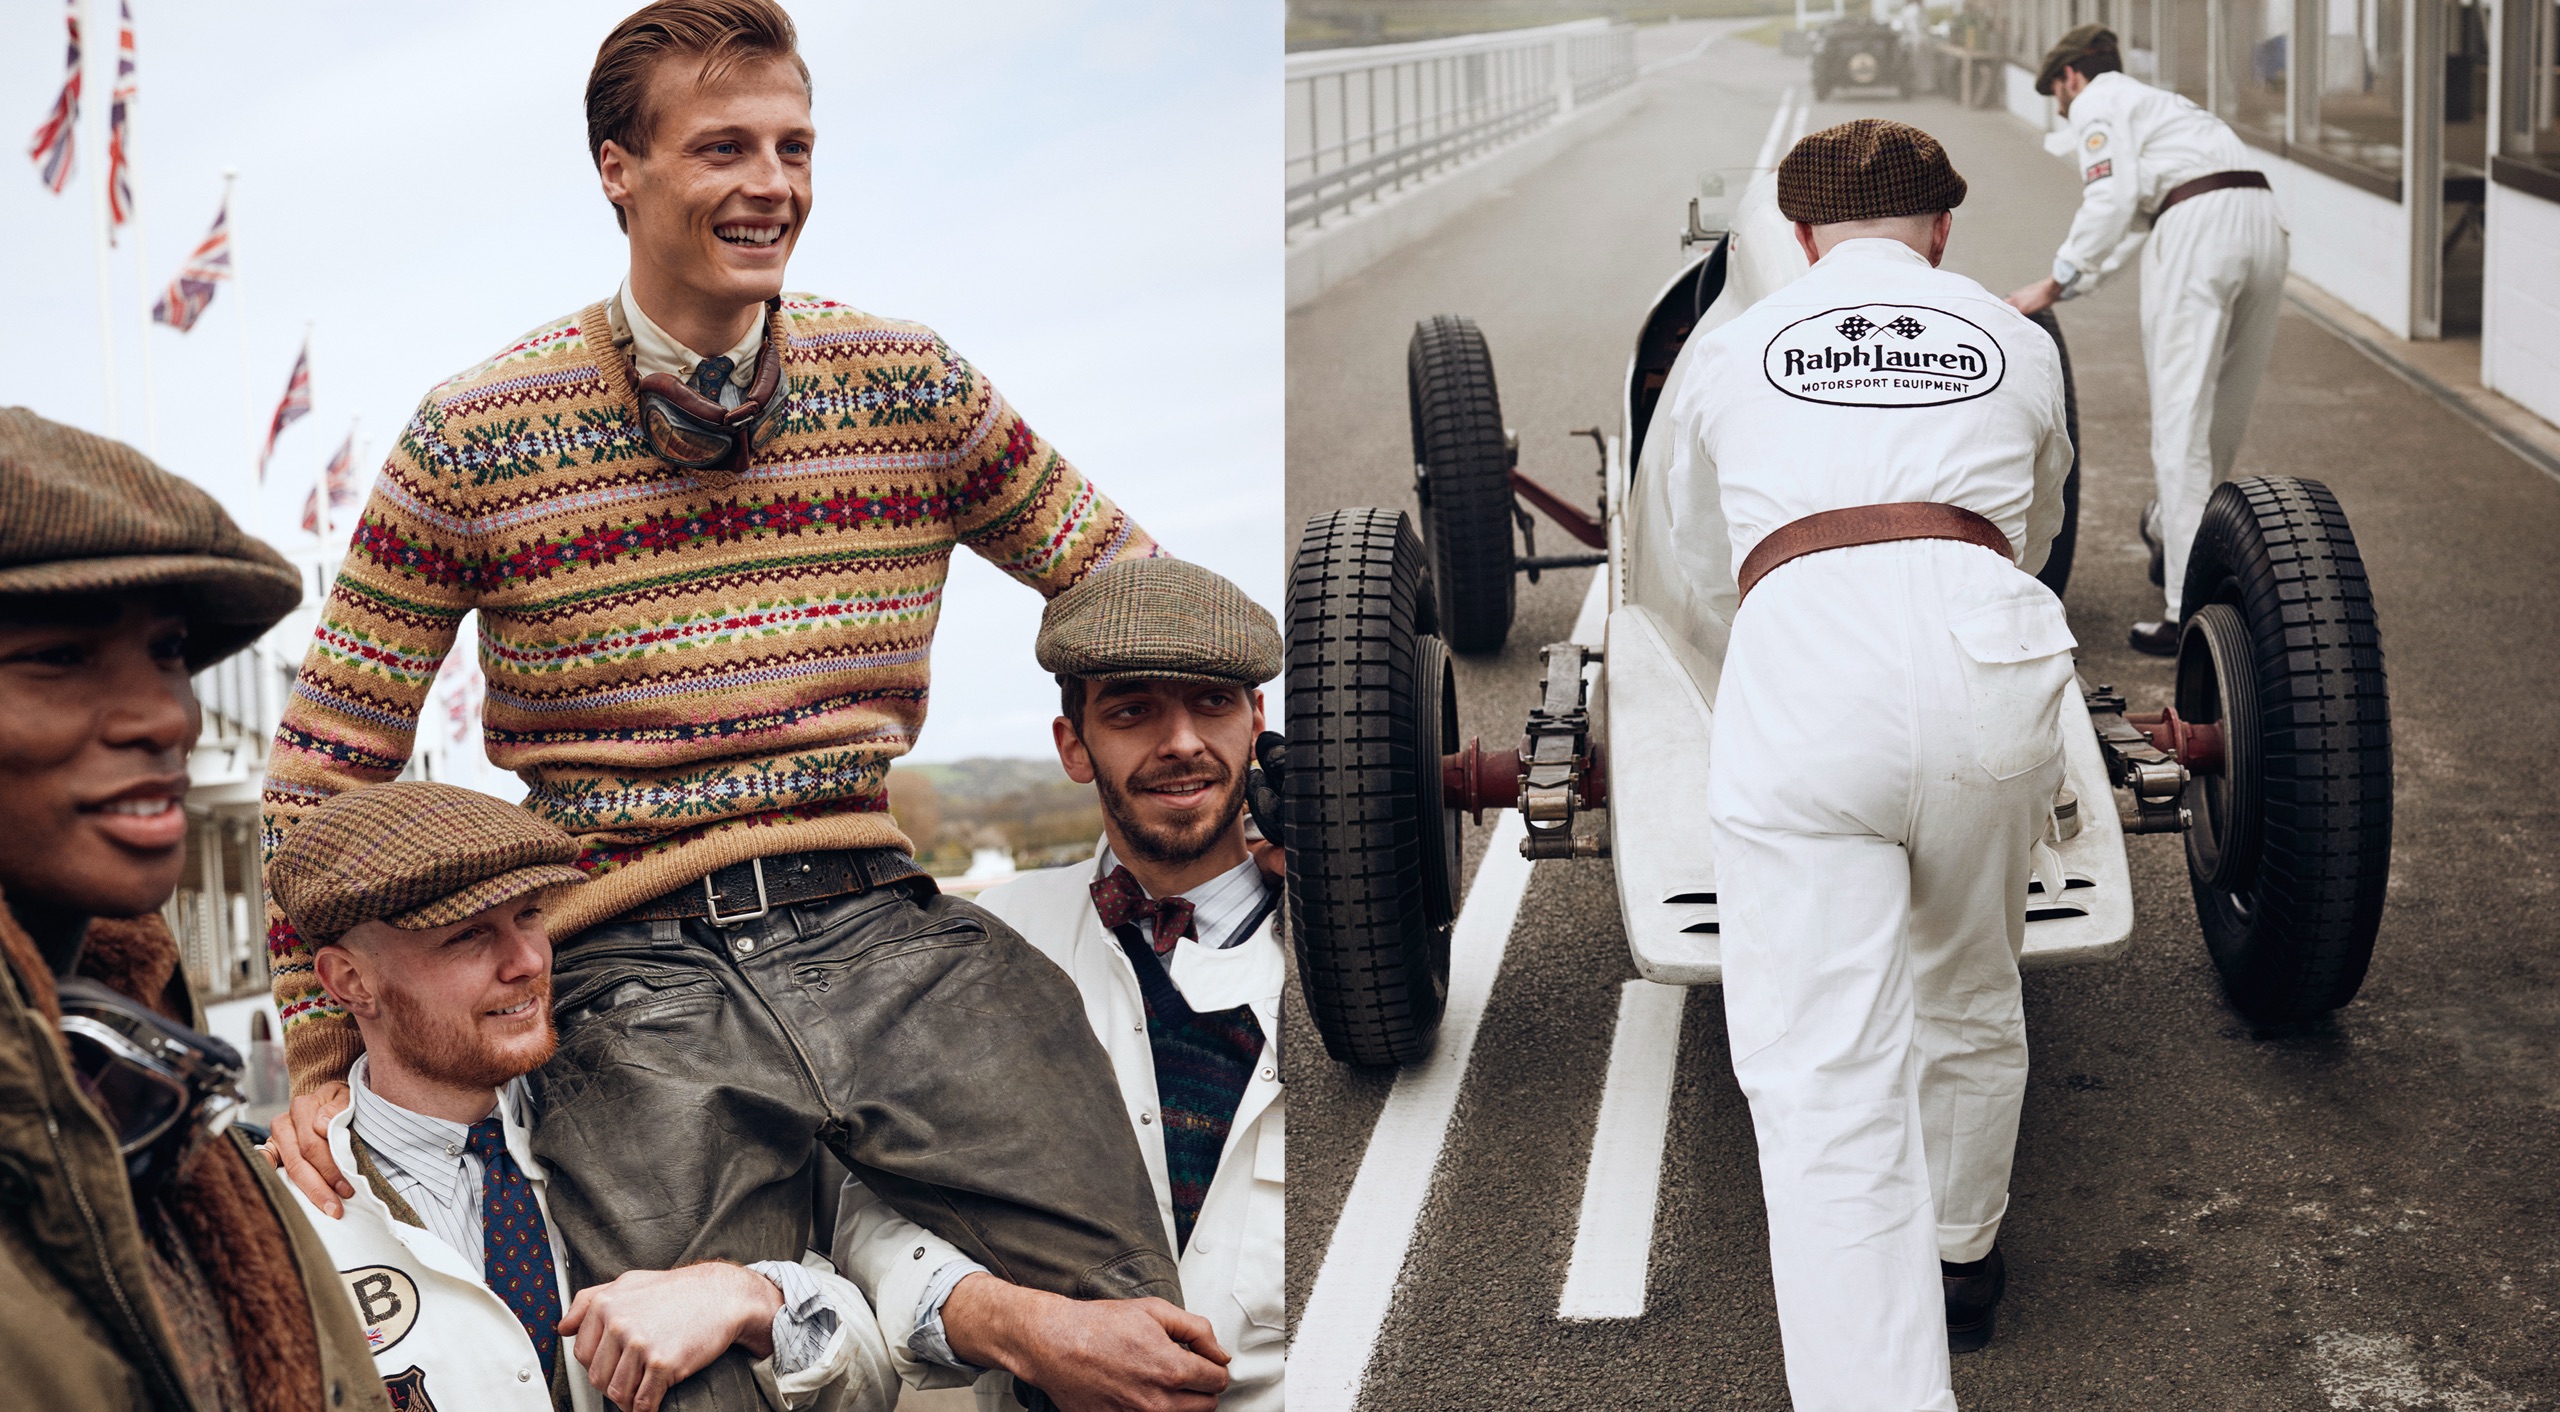 <strong>ON LOCATION</strong><br/><span>This season of Polo Originals, inspired by the golden era of Grand Prix car racing, was photographed at the Goodwood Motor Circuit, which is located in West Sussex, on the 12,000-acre Goodwood Estate. The Circuit has since become known for hosting a number of prestigious motorsport events, including the famous Festival of Speed and Revival.</span> <br/><rlmag_link href="https://www.ralphlauren.global/ma/en/search?cgid=brands-prl-tough-and-refined-cg"><button class="shop-collection">Shop the Story</button></rlmag_link>